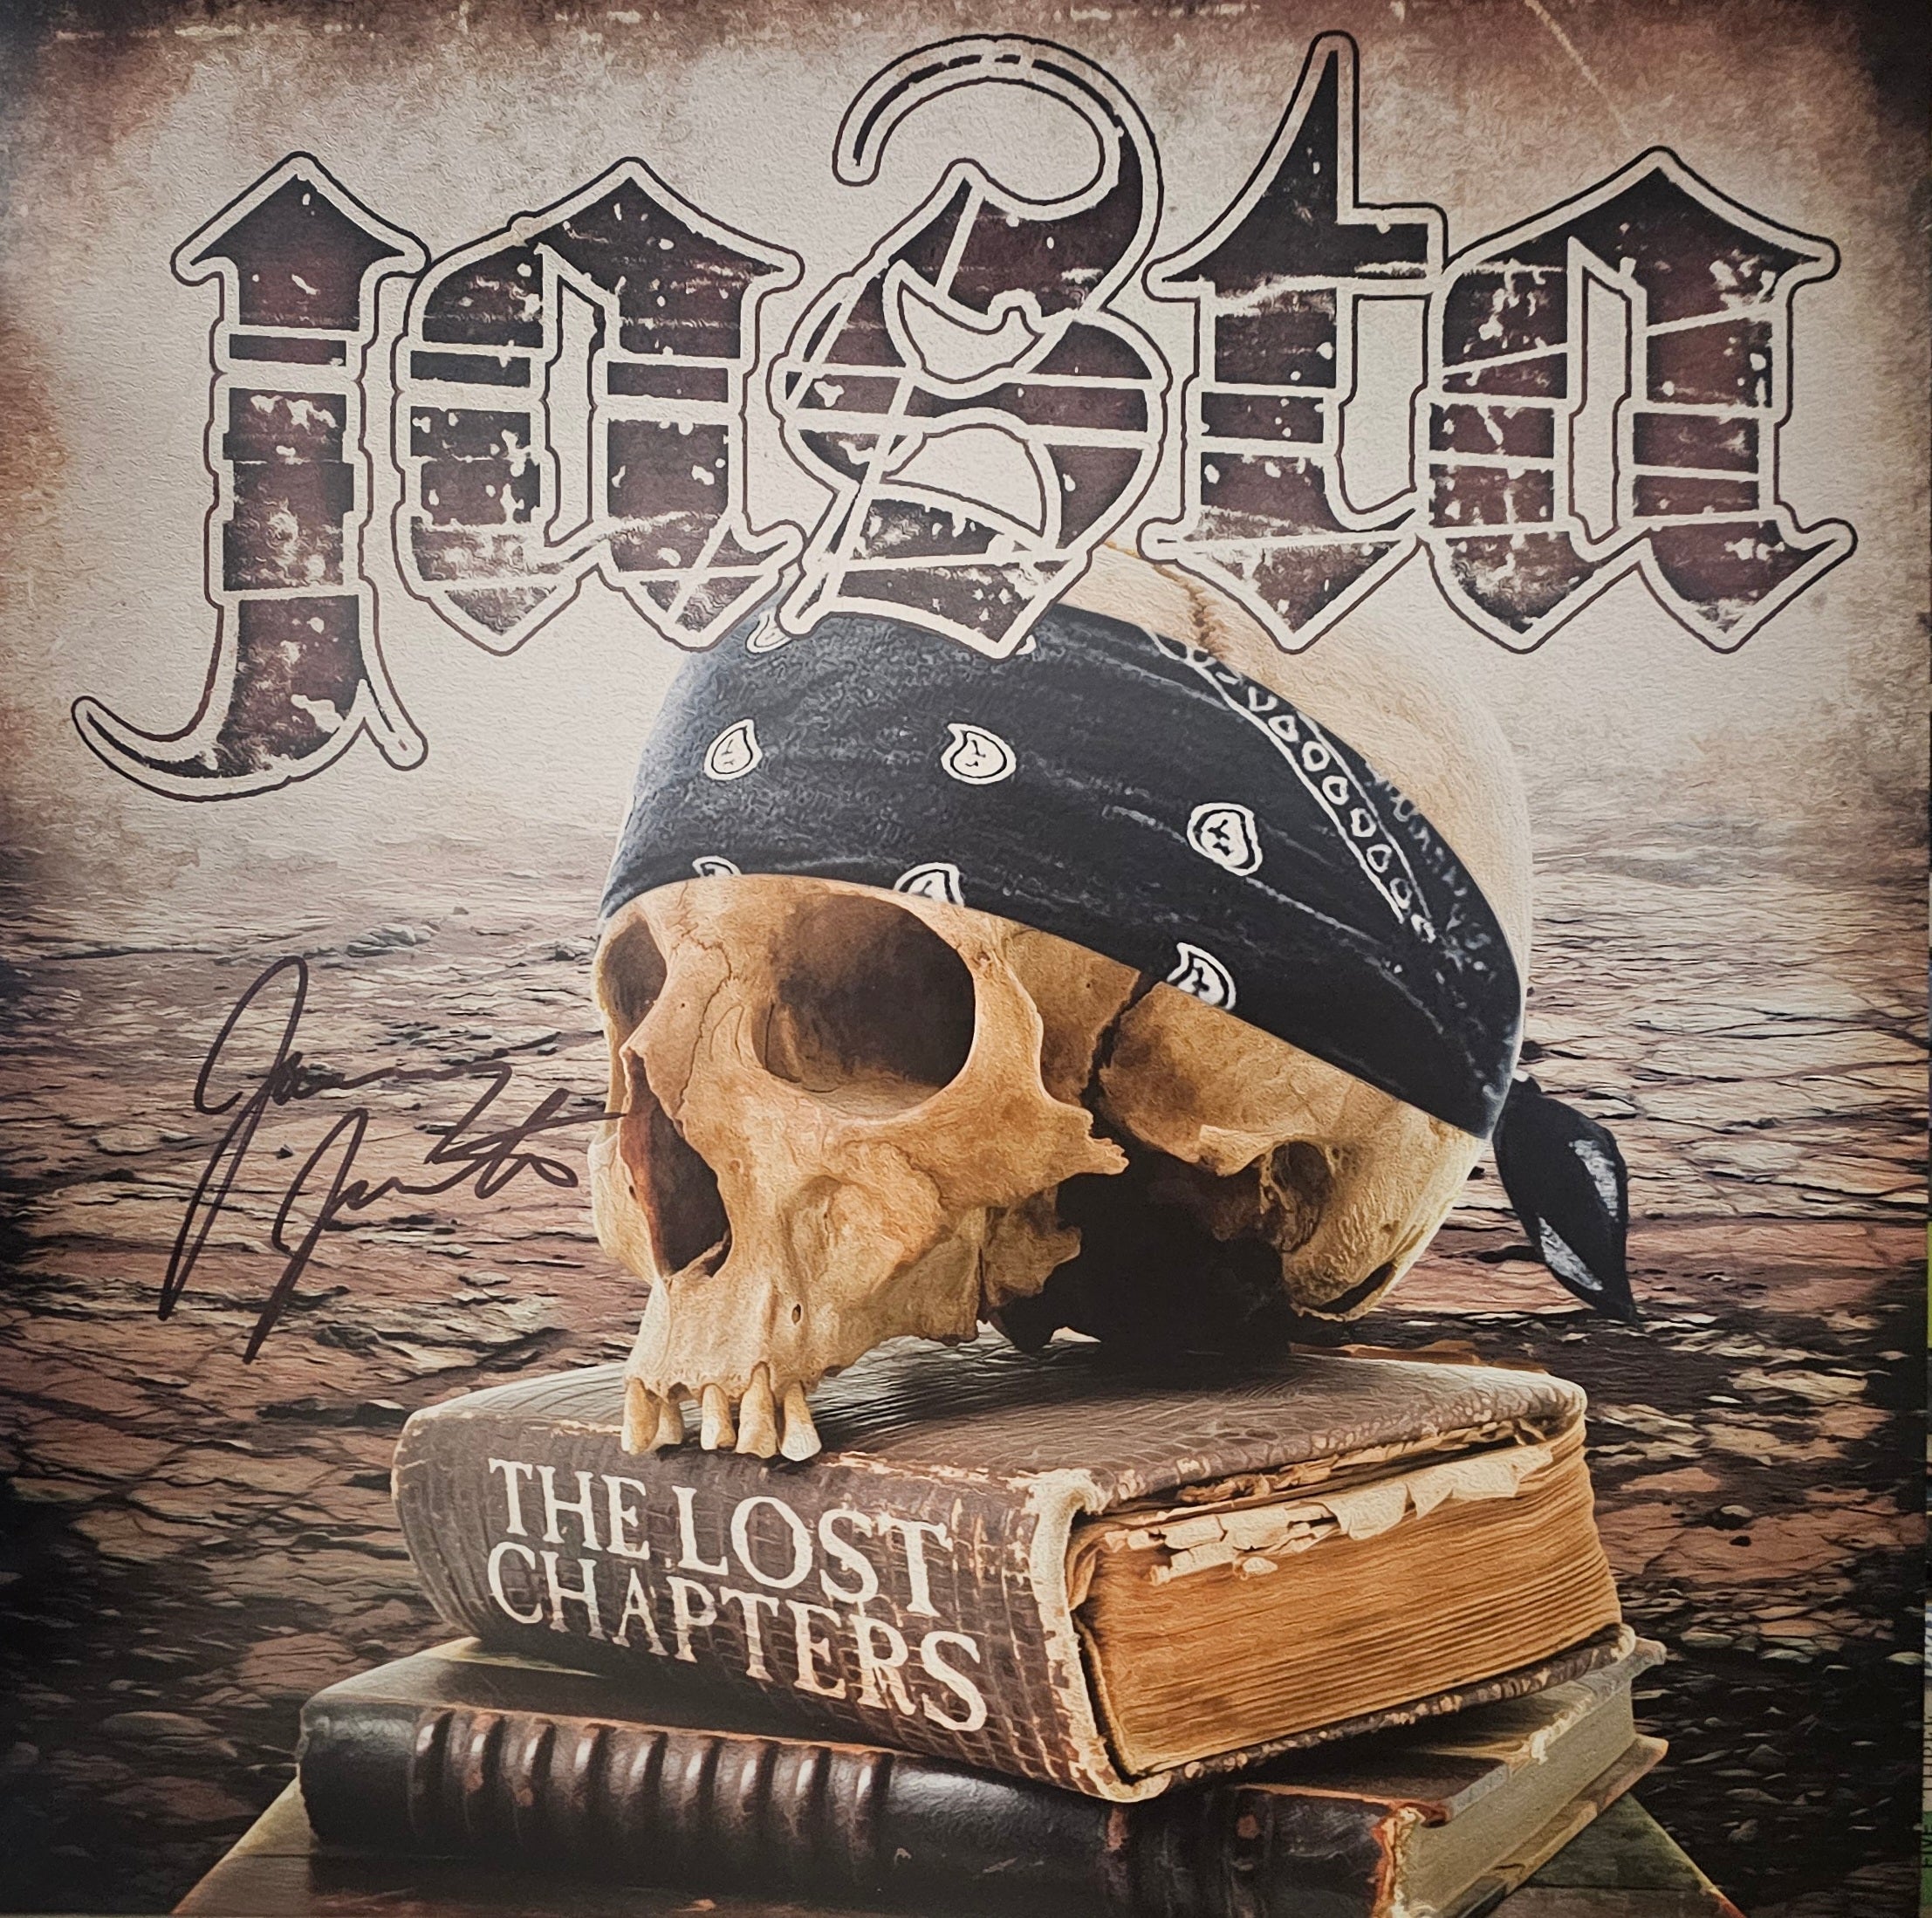 Jasta (Hatebreed)-The Lost Chapters (White)(Signed By Jamey Jasta)